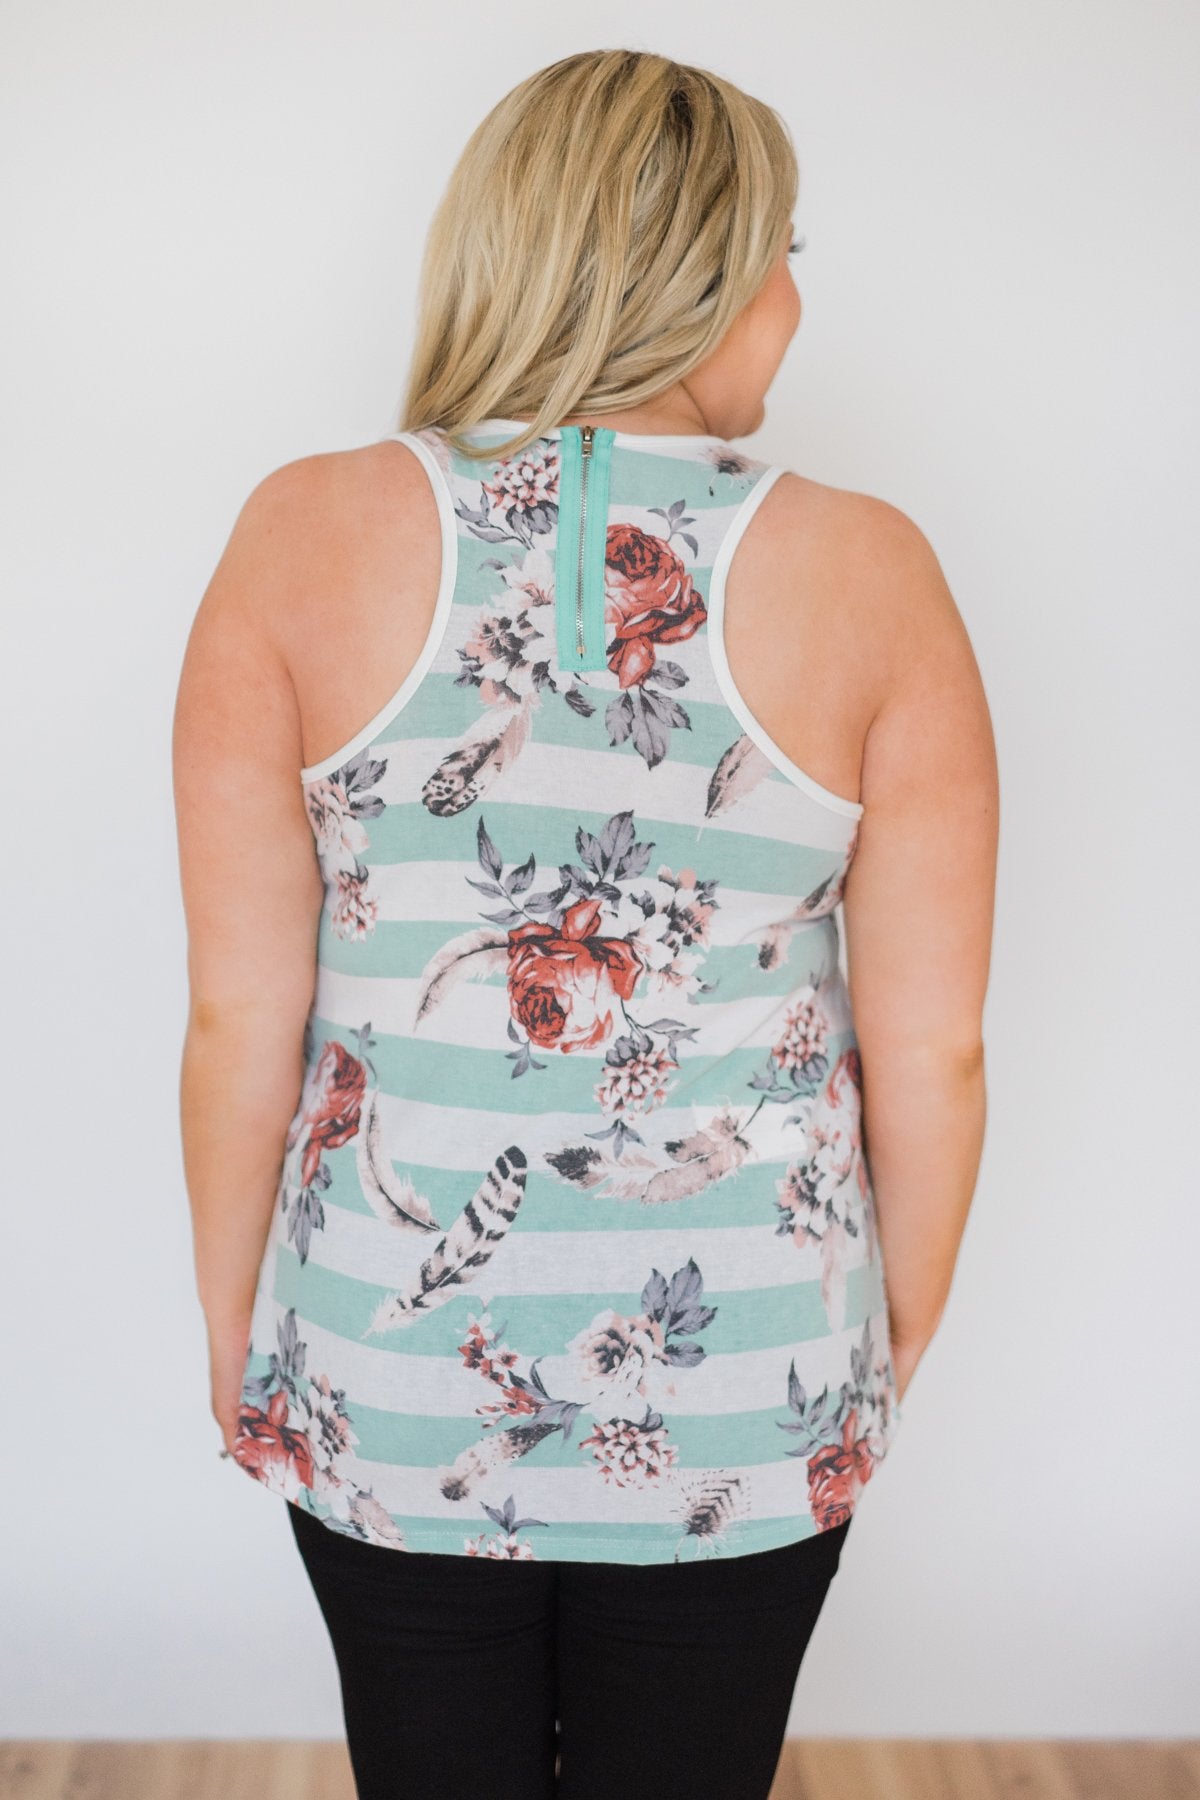 Caught in the Dream Floral & Feather Tank Top